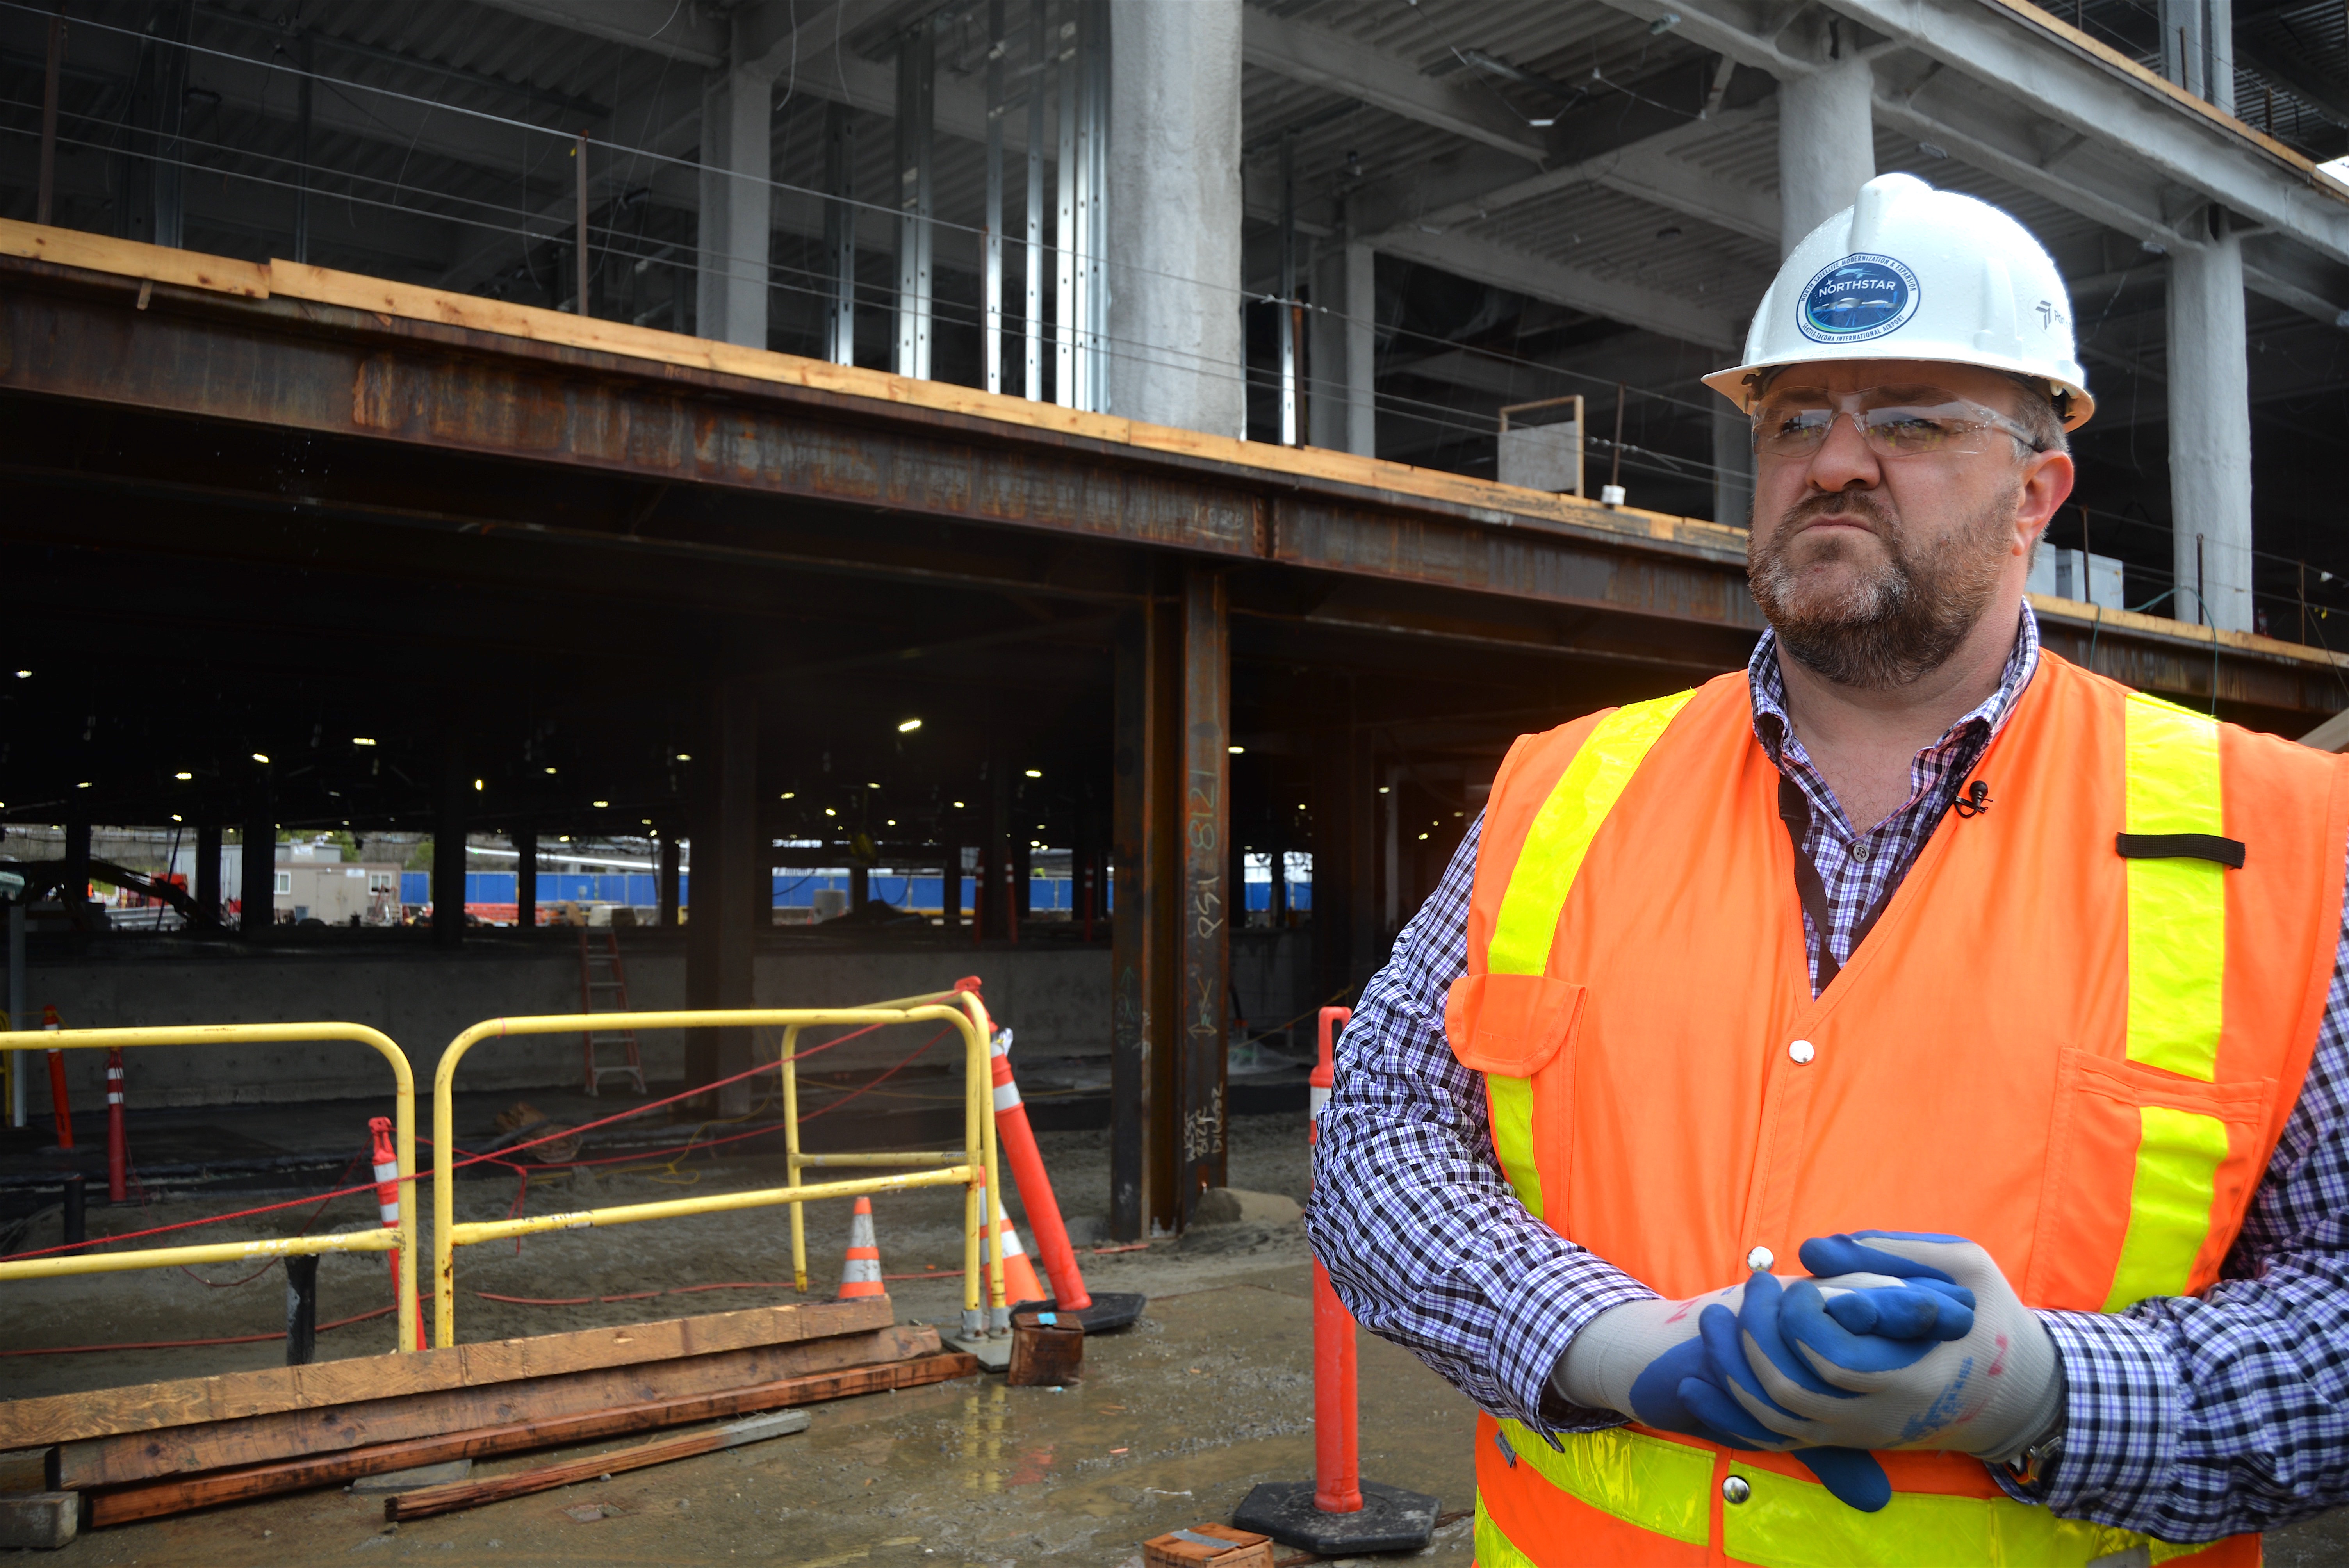 Project manager Ken Warren said the time was right to transform the 45-year old facility.